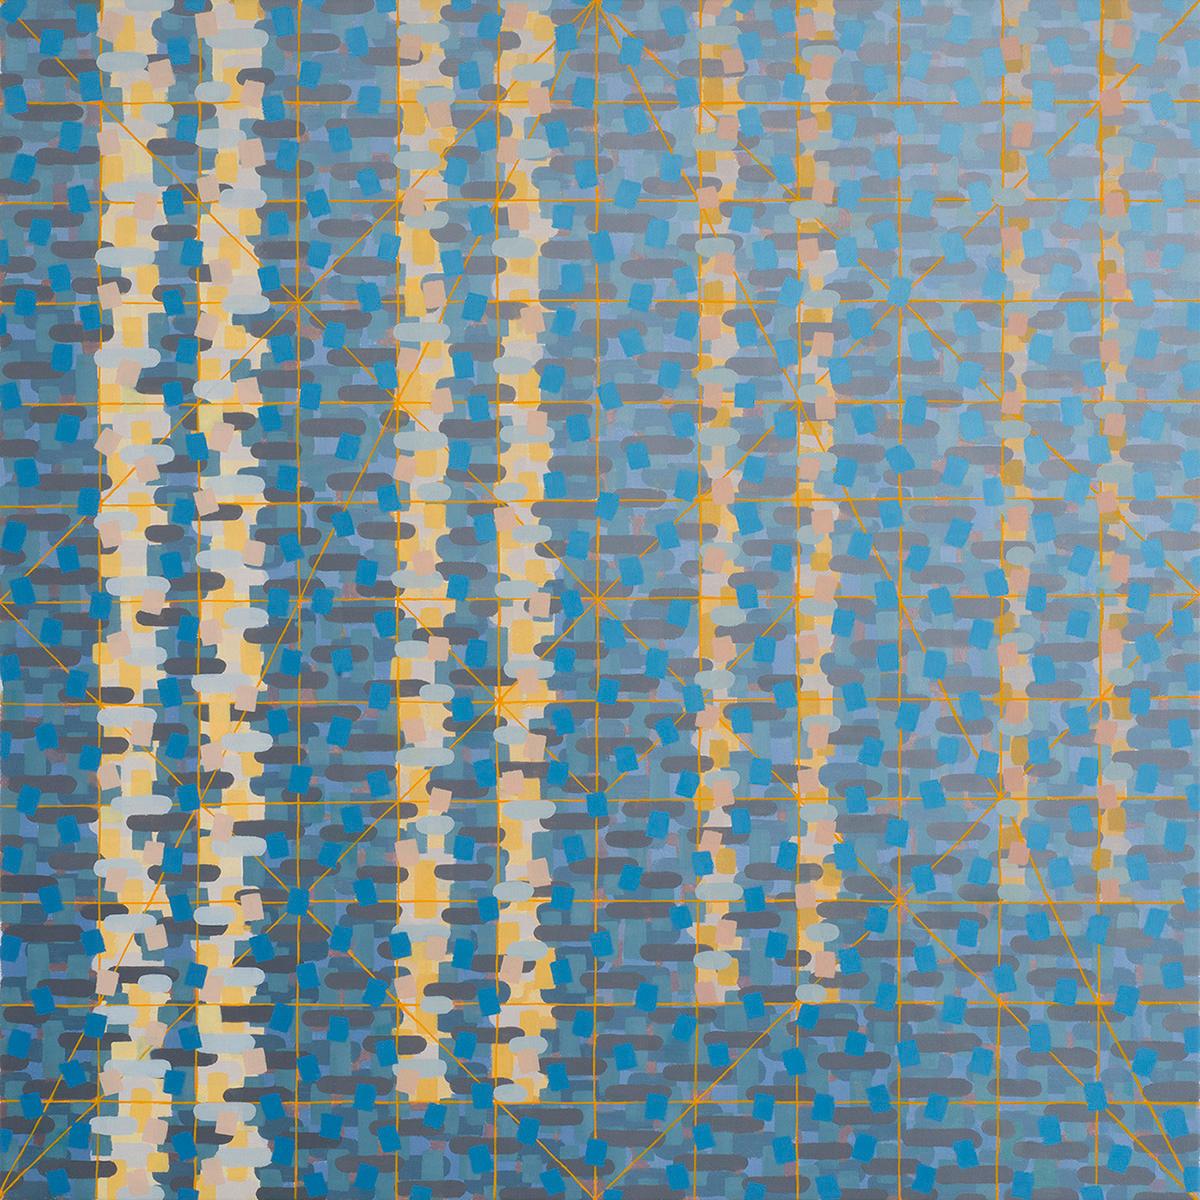 Rachael Wren Landscape Painting - "RECURRENCE", oil painting on linen, geometric, blue, grey, silver, tan, trees